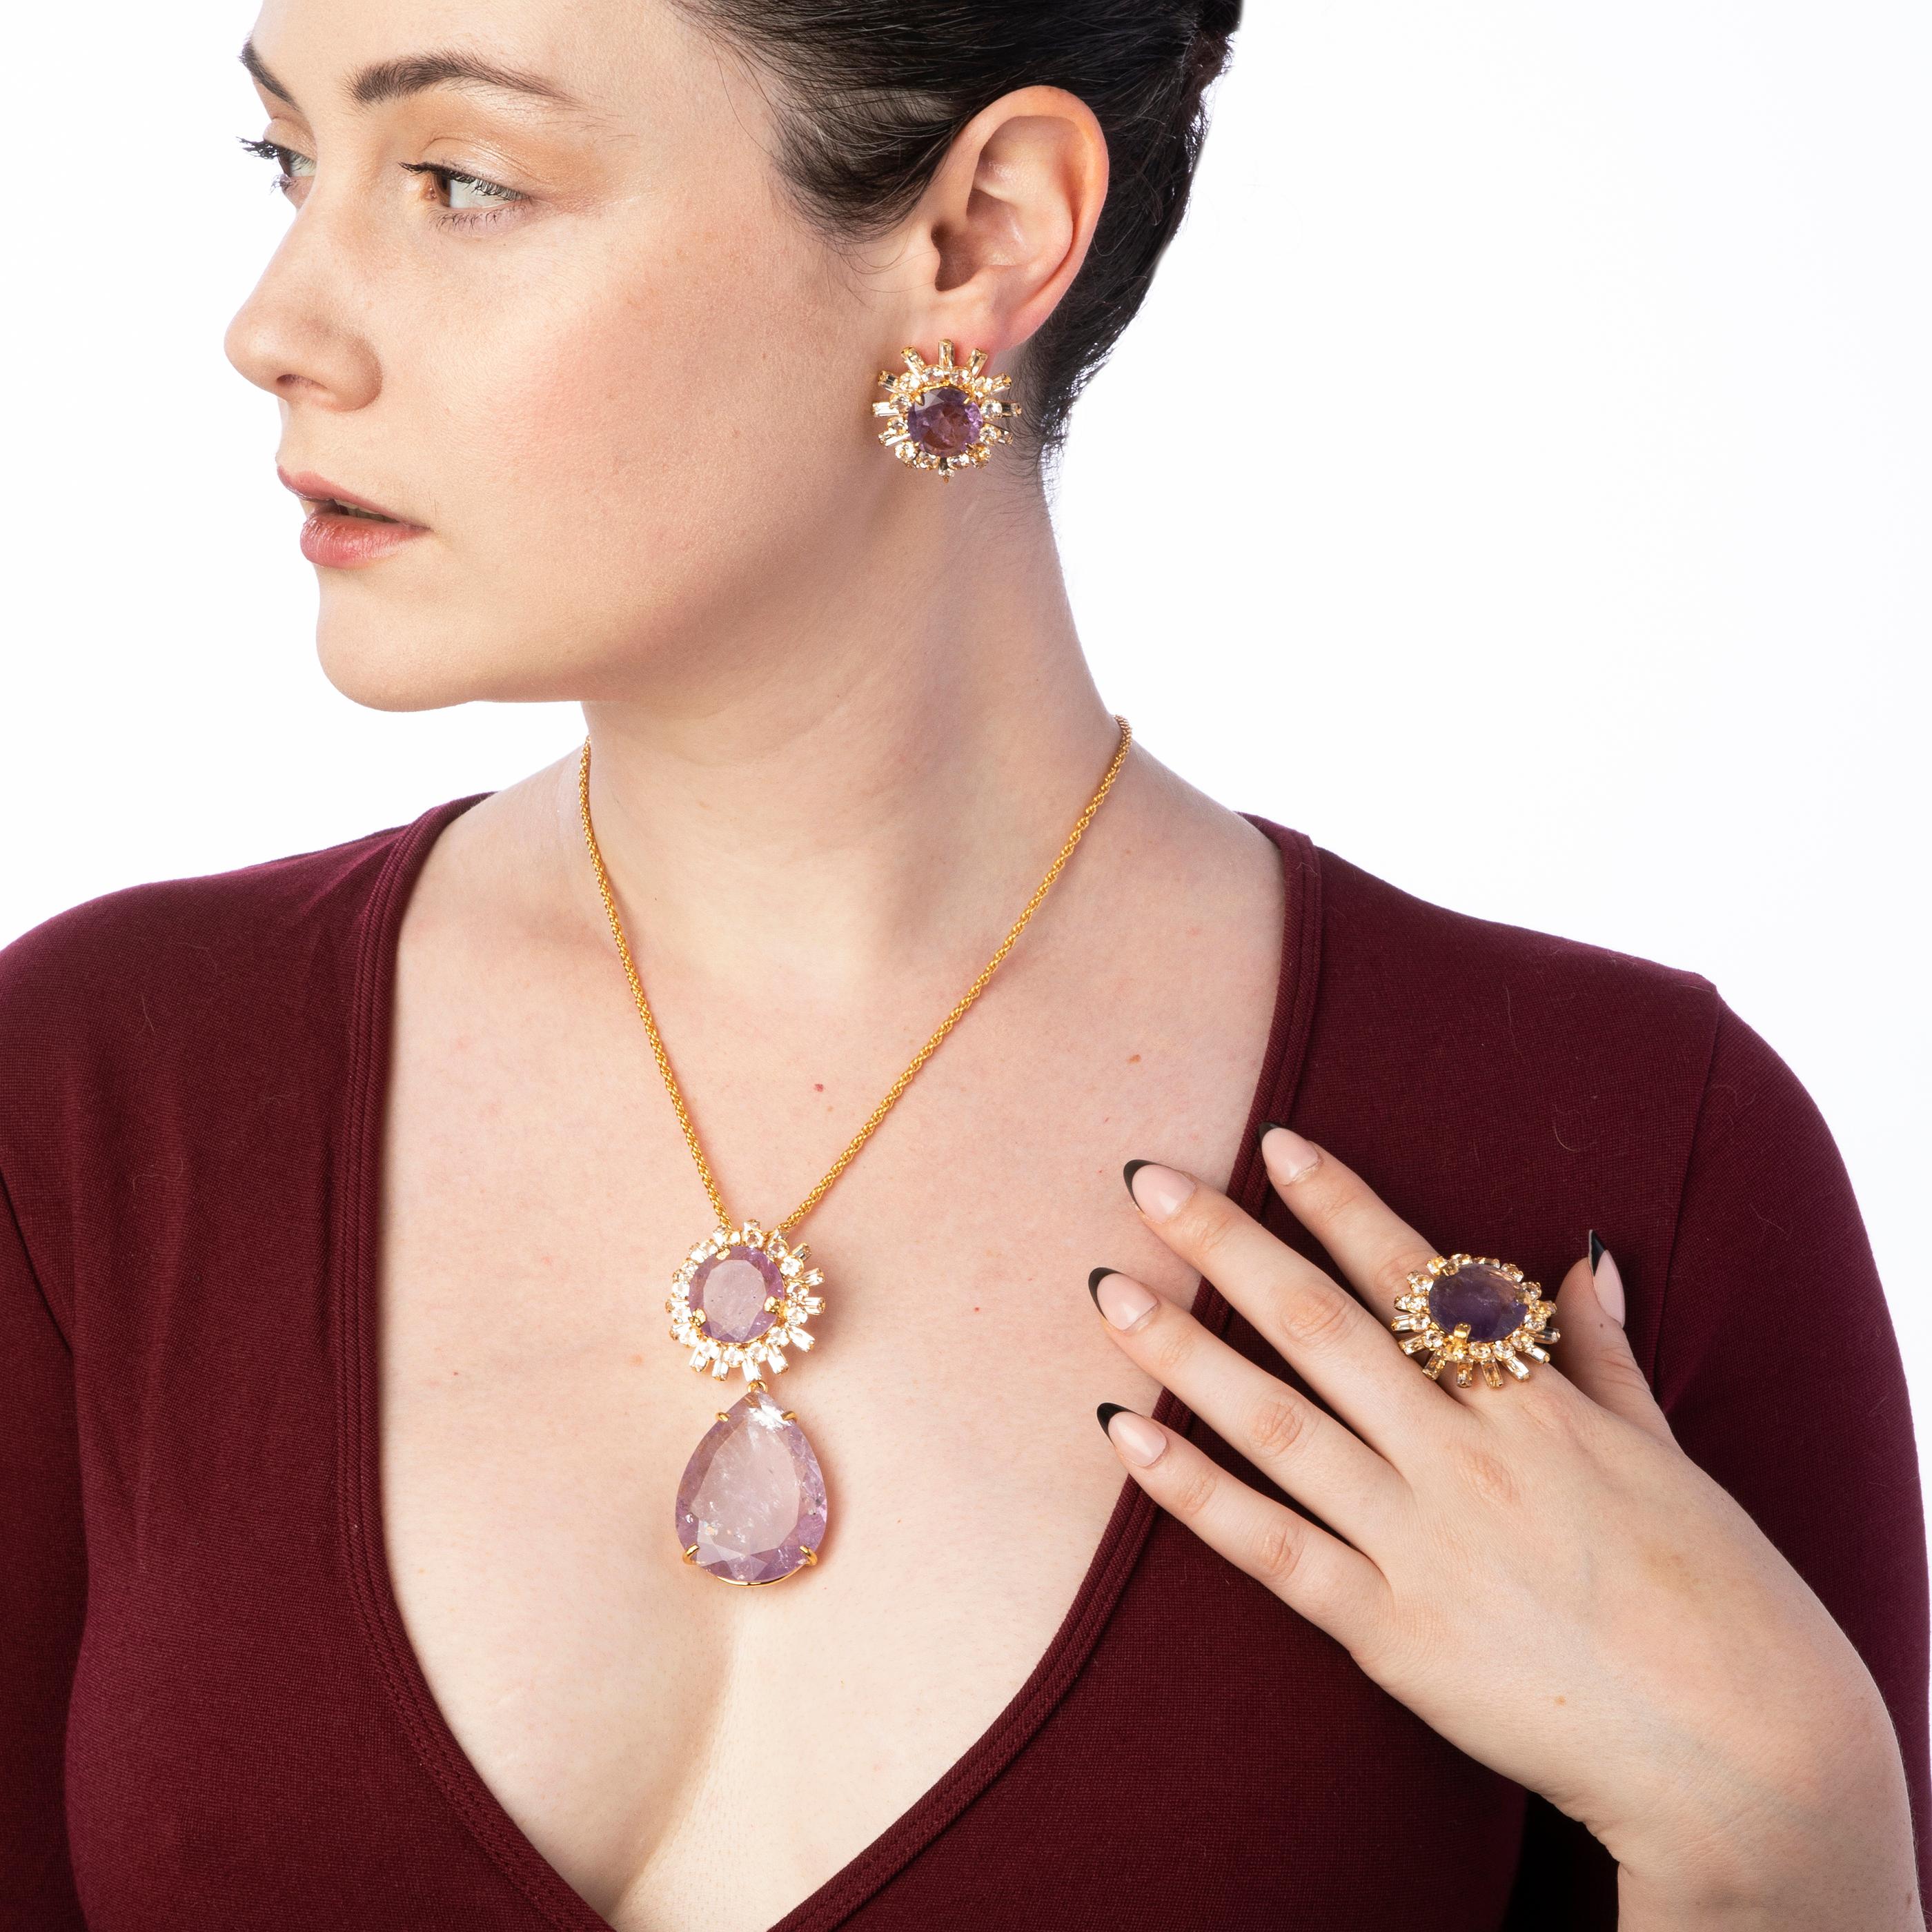 The Kelly Pendant, fashioned from semi-precious stones, boasts a distinct vintage design.

SKU: PND-BG-3
Stones: Amethyst & Clear Quartz
Material: 14K Gold Plated
Dimensions: 2 3/4' x 1 1/4'
*The chain is sold separately in another listing. This